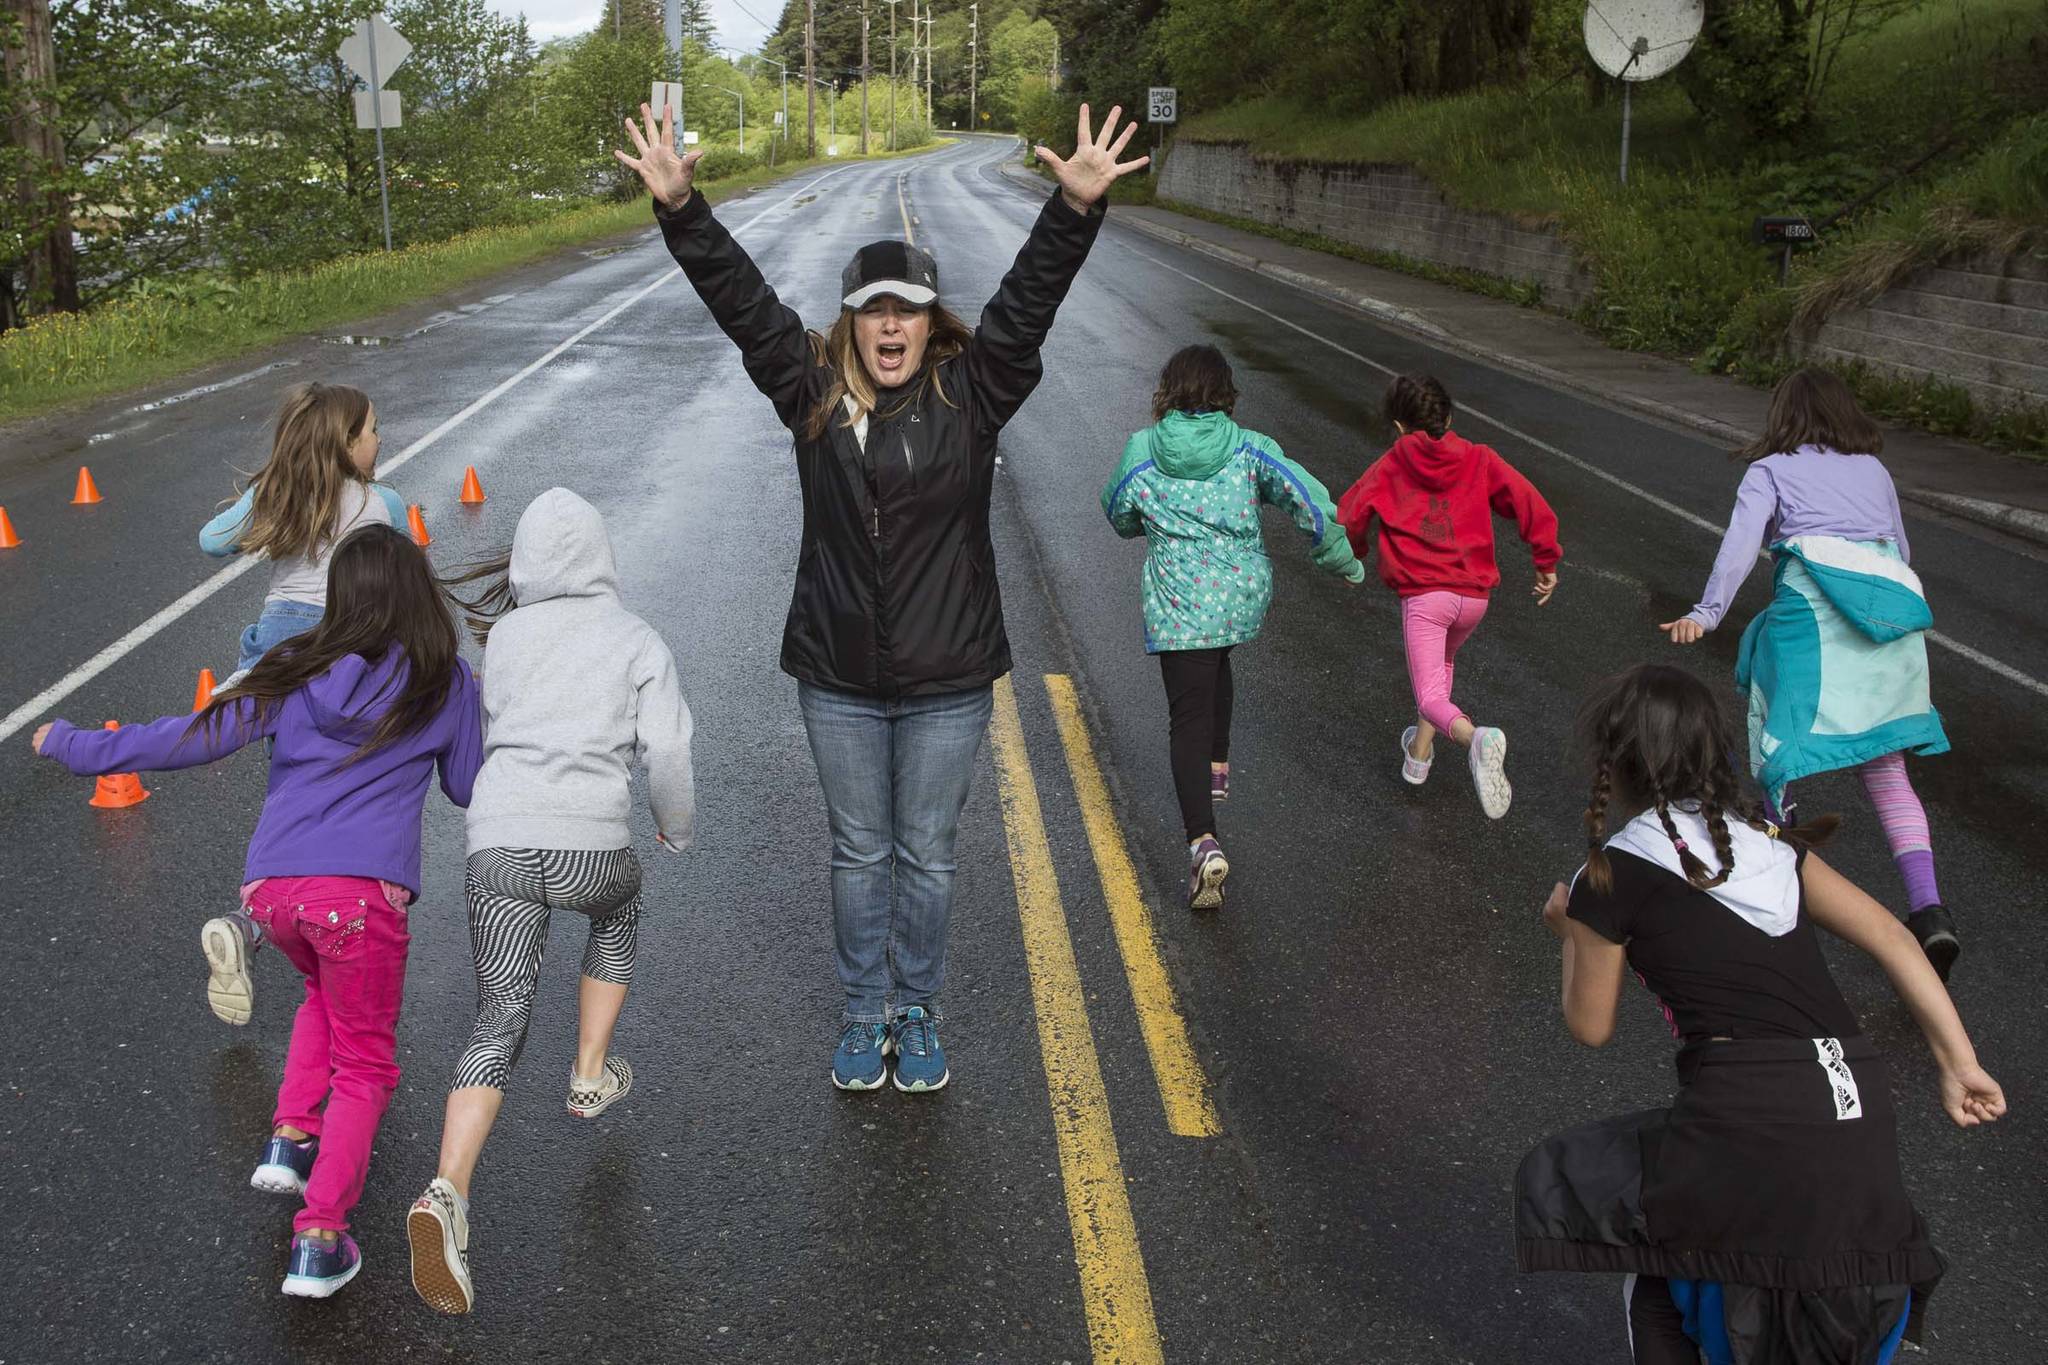 Physical Education Teacher Nikki Richert send students off for Harborview Elementary School’s annual Fun Run along Glacier Avenue on Friday, May 17, 2019. Students from Montessori Borealis also ran the three mile course. (Michael Penn | Juneau Empire)